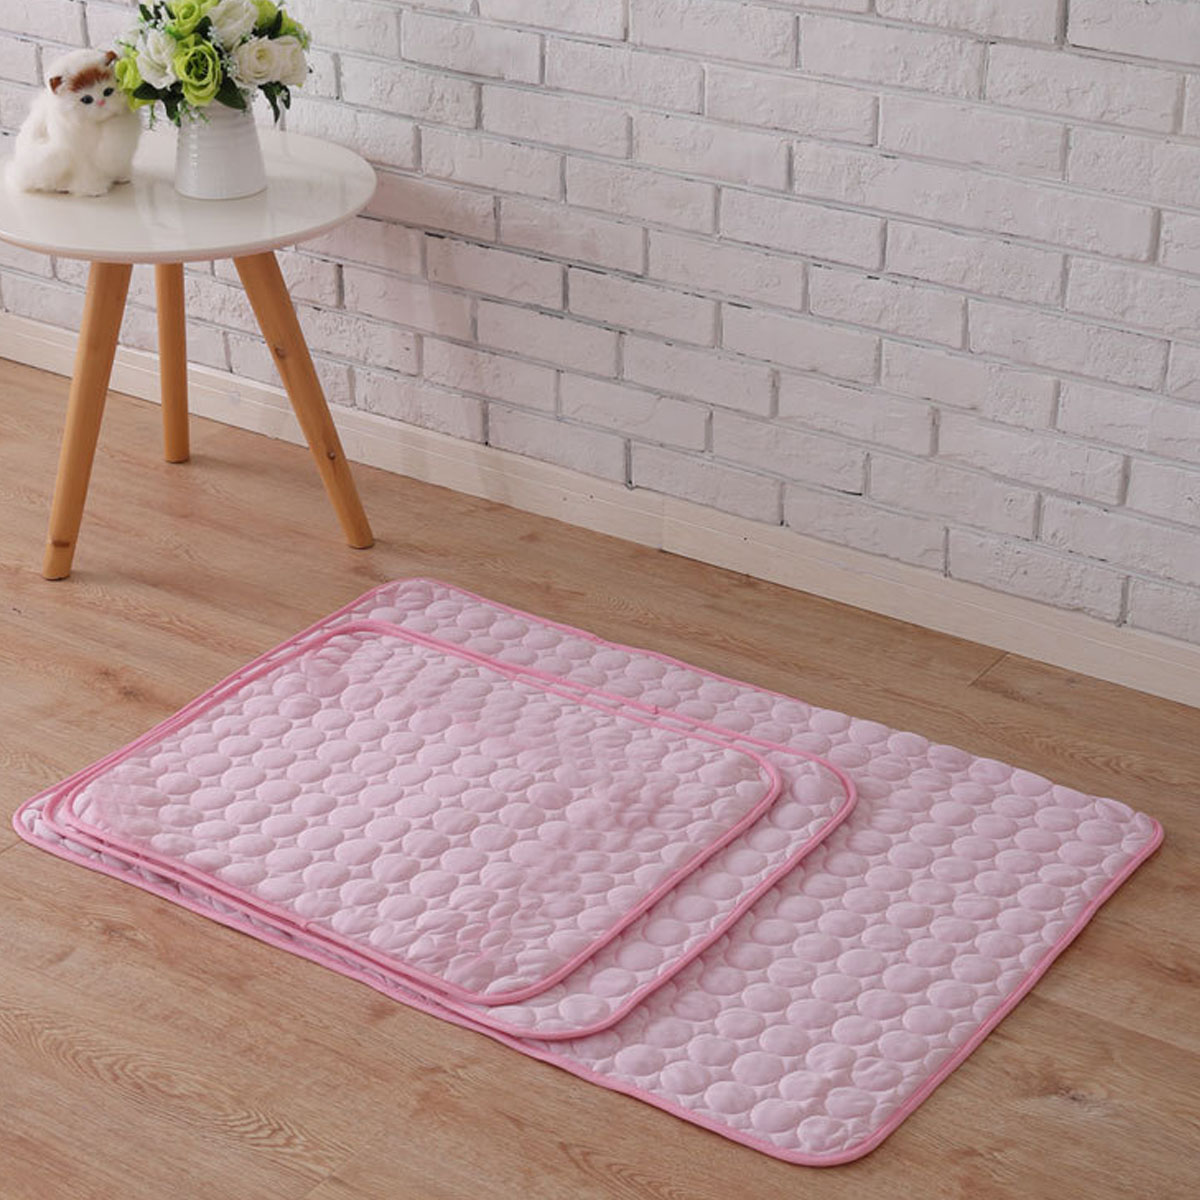 

Pink Pet Summer Cooling Mat Cold Gel Pad Comfortable Cushion For Dog Cat Puppy Decorations